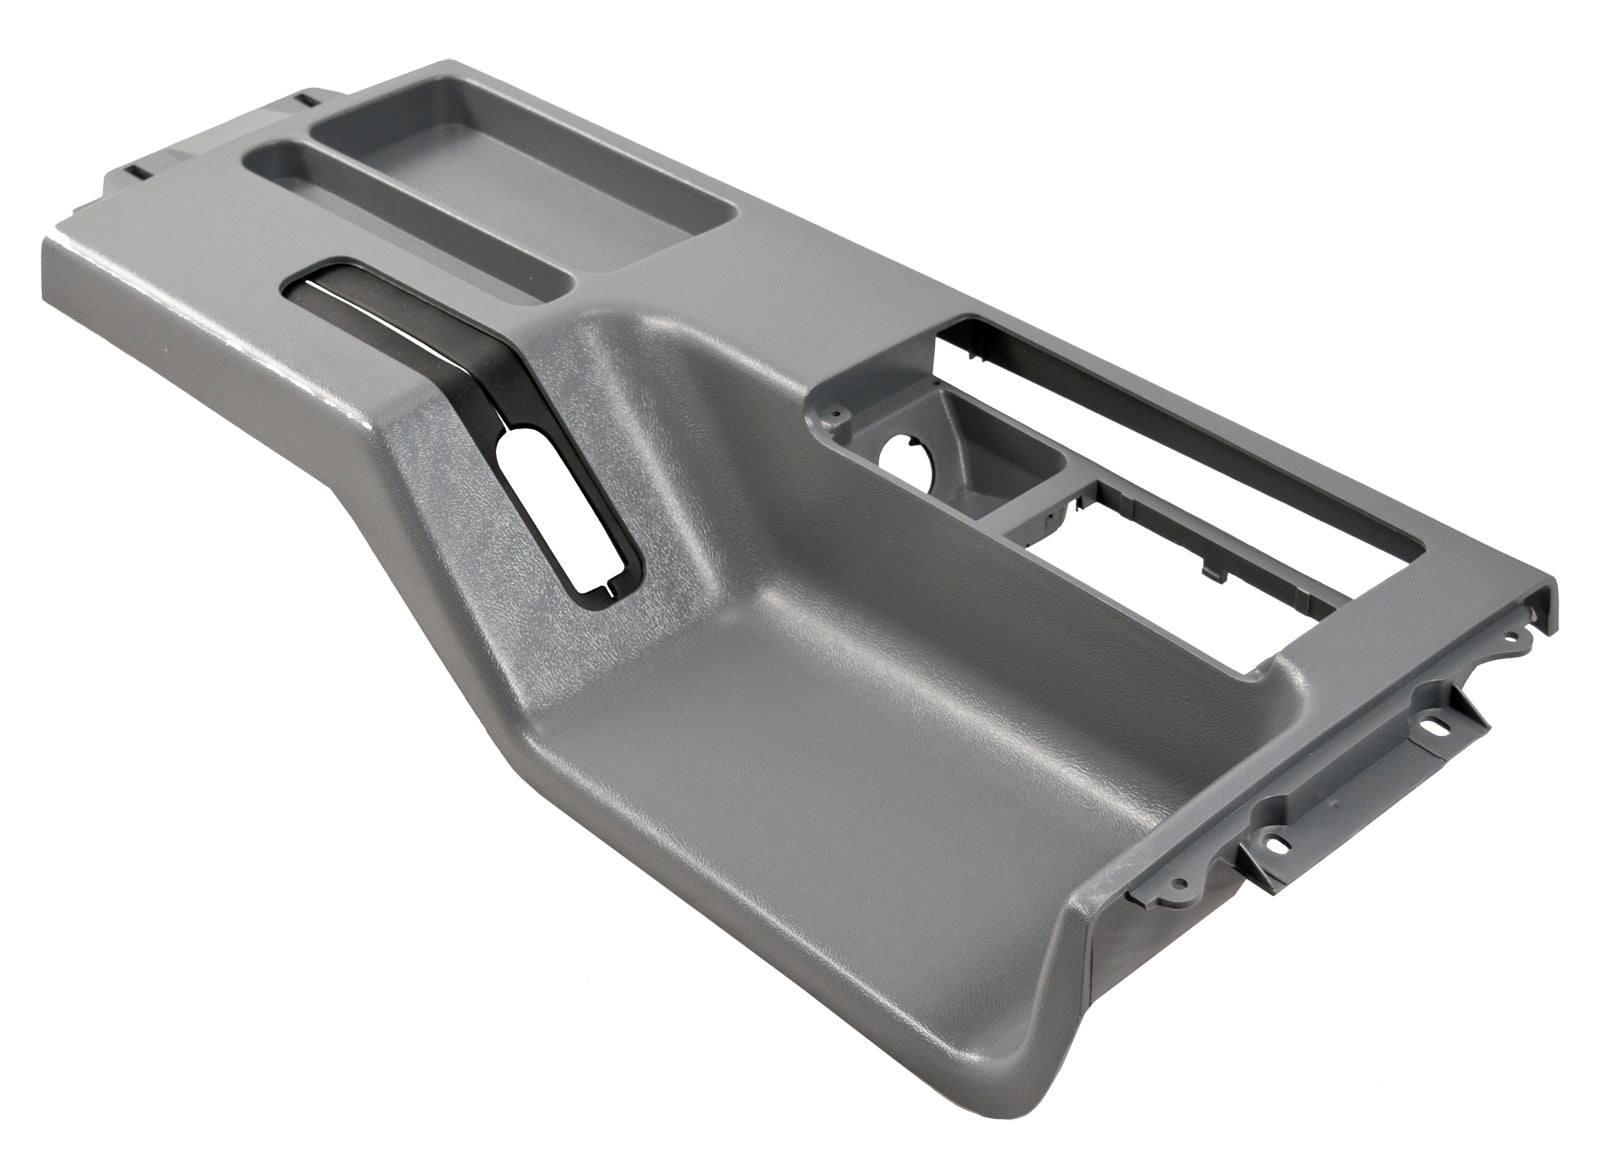 1987-1993 Mustang Interior Center Top Console in gray (without Power Mirrors)